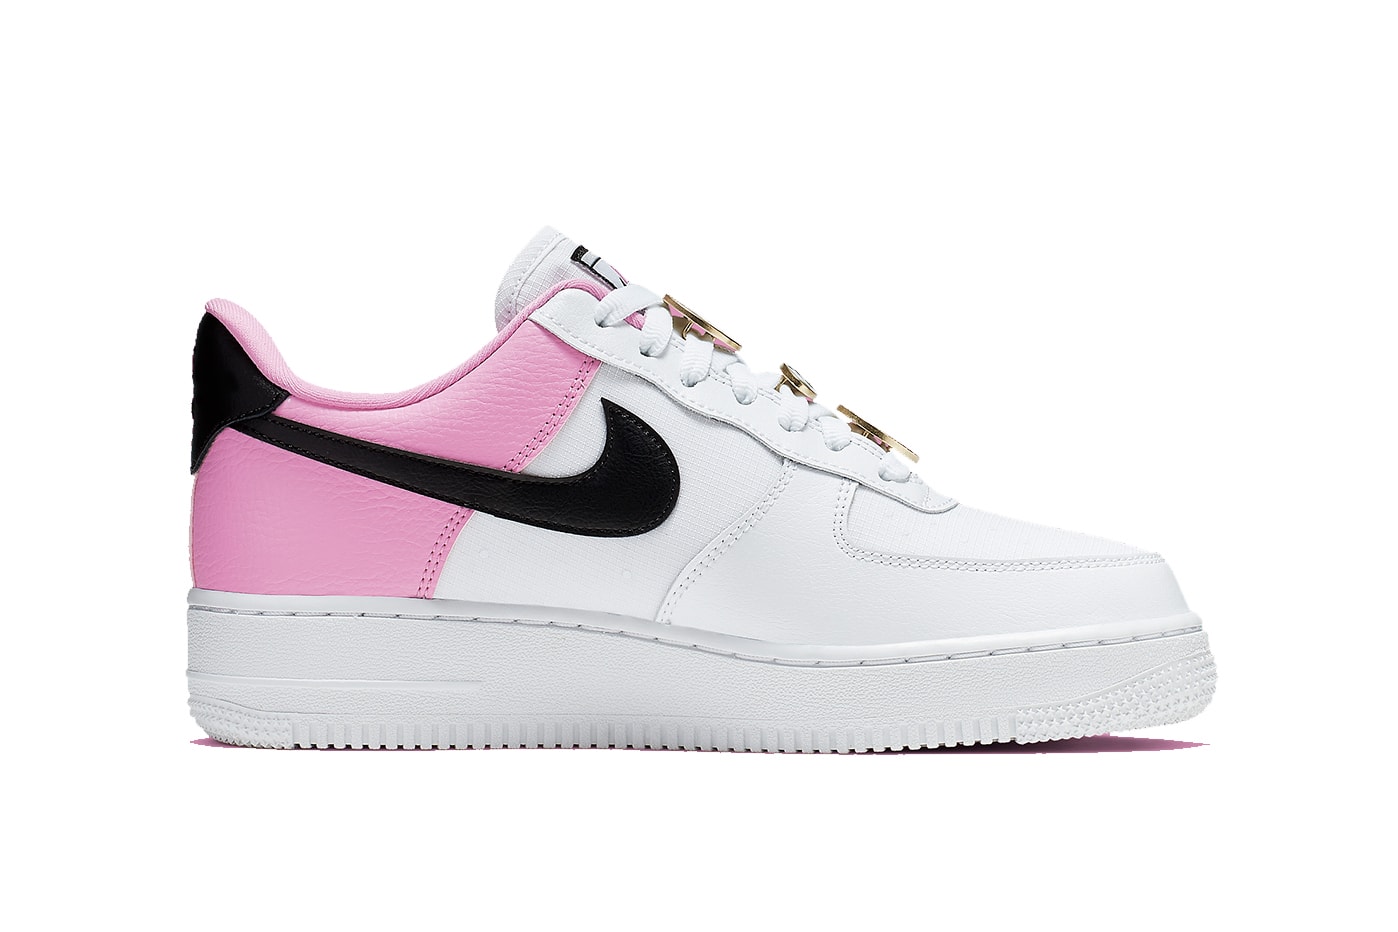 Nike Air Force 1 Sneaker Trainer "China Rose" Lacelocks Pink White Black Swoosh Shoe Footwear Releases Where To Buy Air Force 1 Sneaker